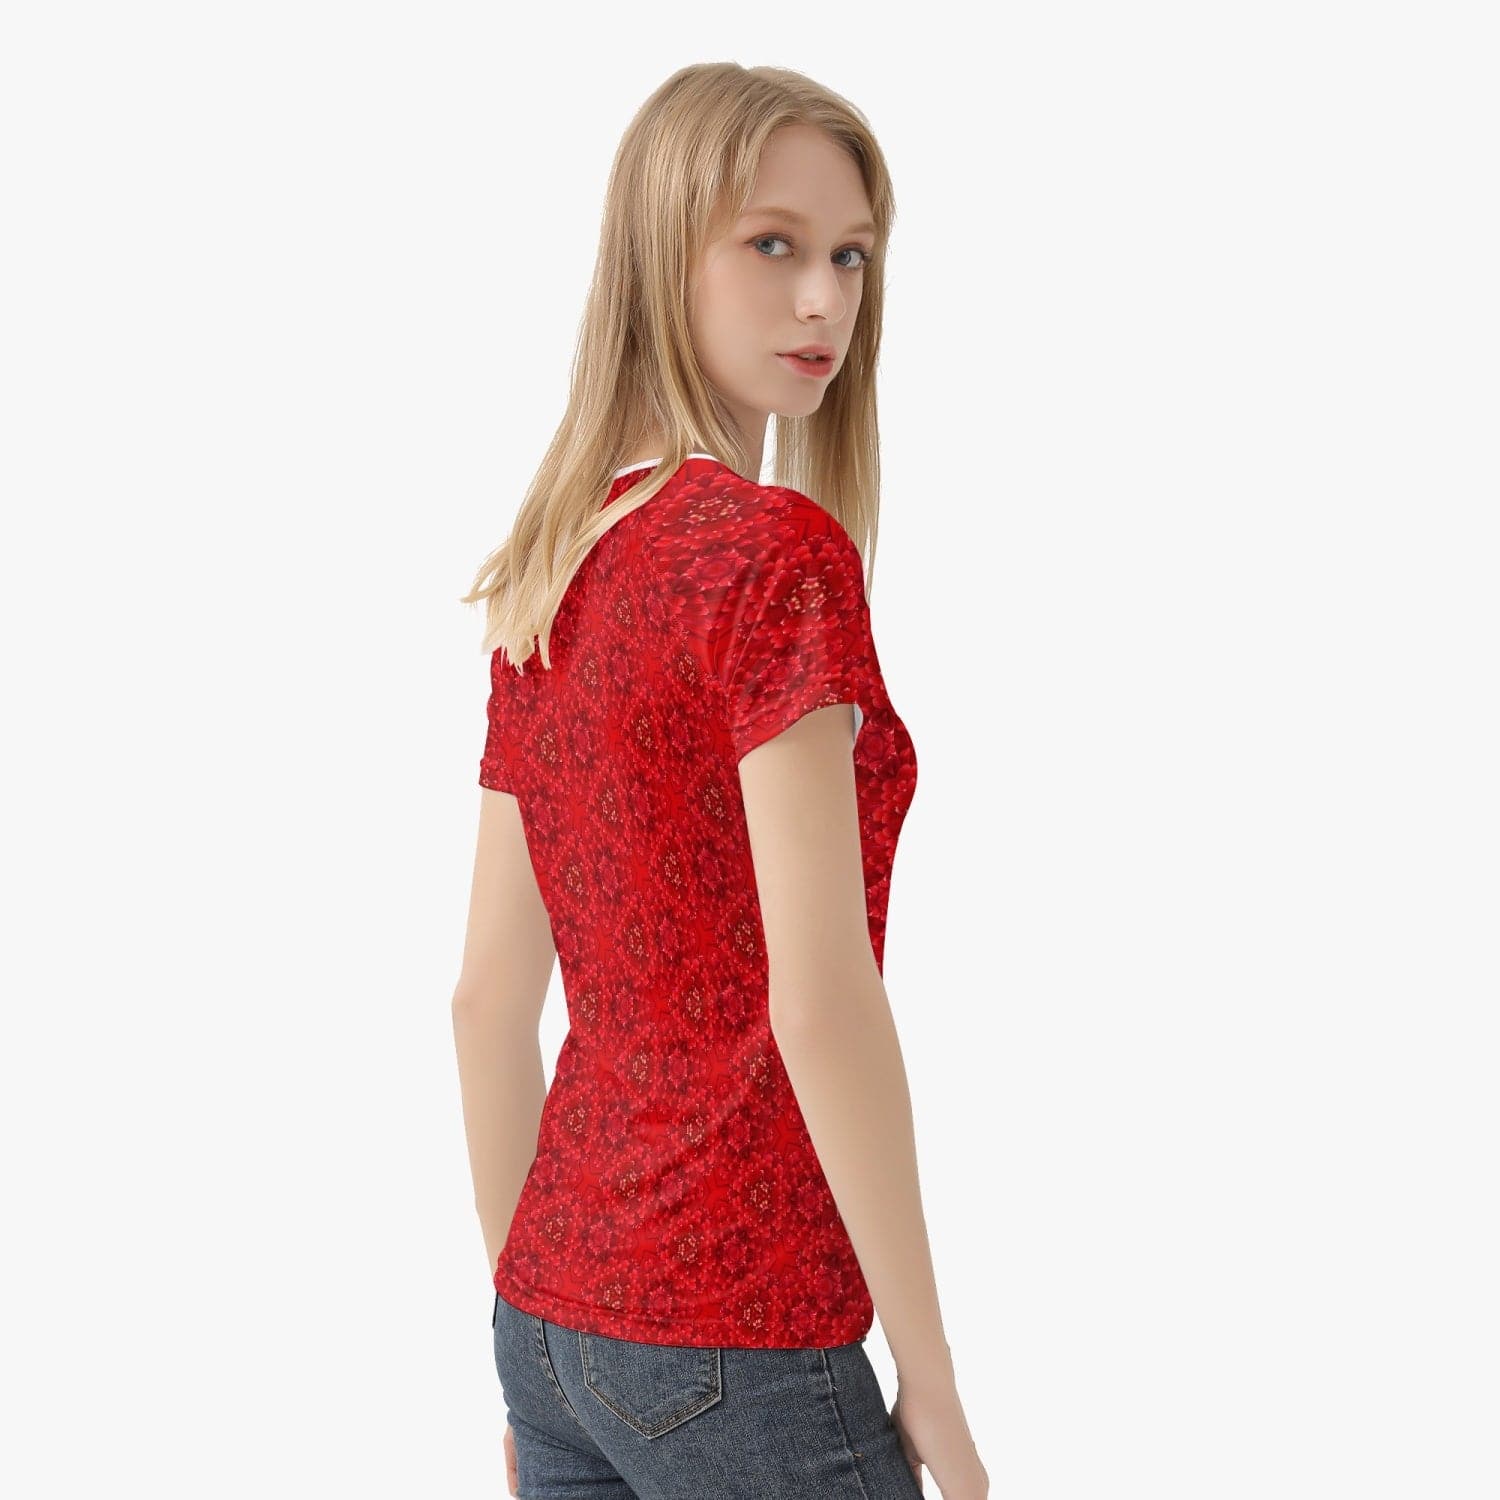 Red Root Chacra  Handmade Yoga Top for  Women sports T-shirt, by Sensus Studio Design